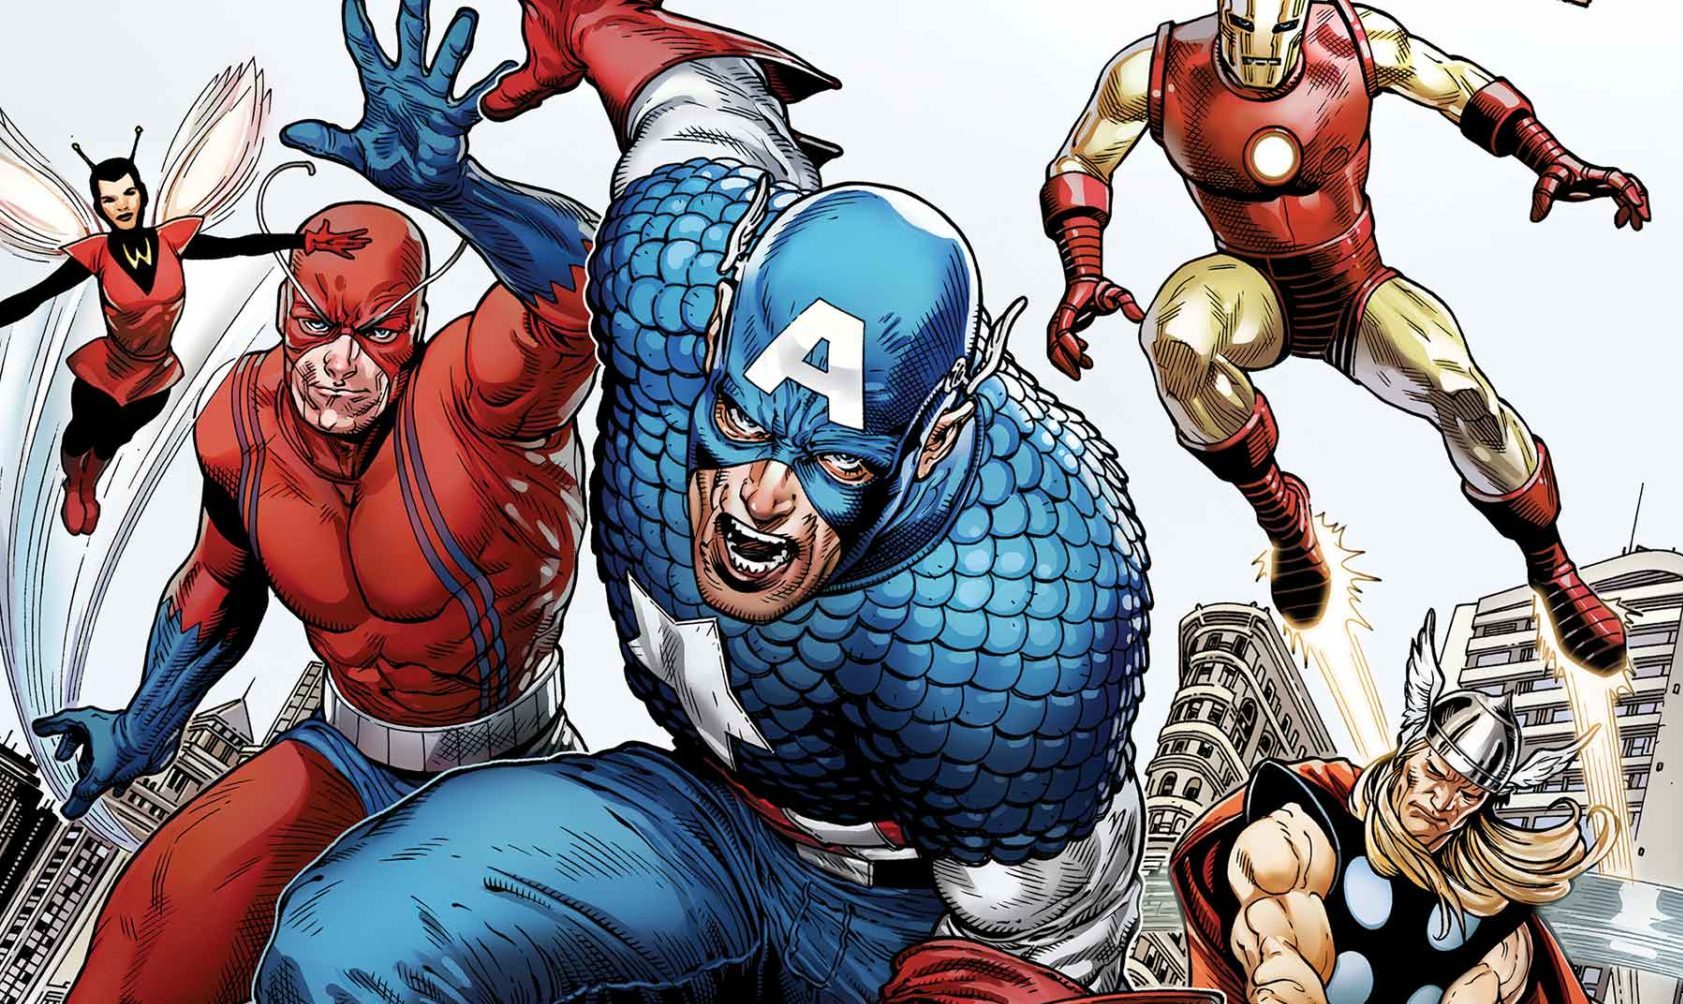 Captain America Turns 80 This March! Marvel Pays Tribute With A Giant-Sized Comic Book!